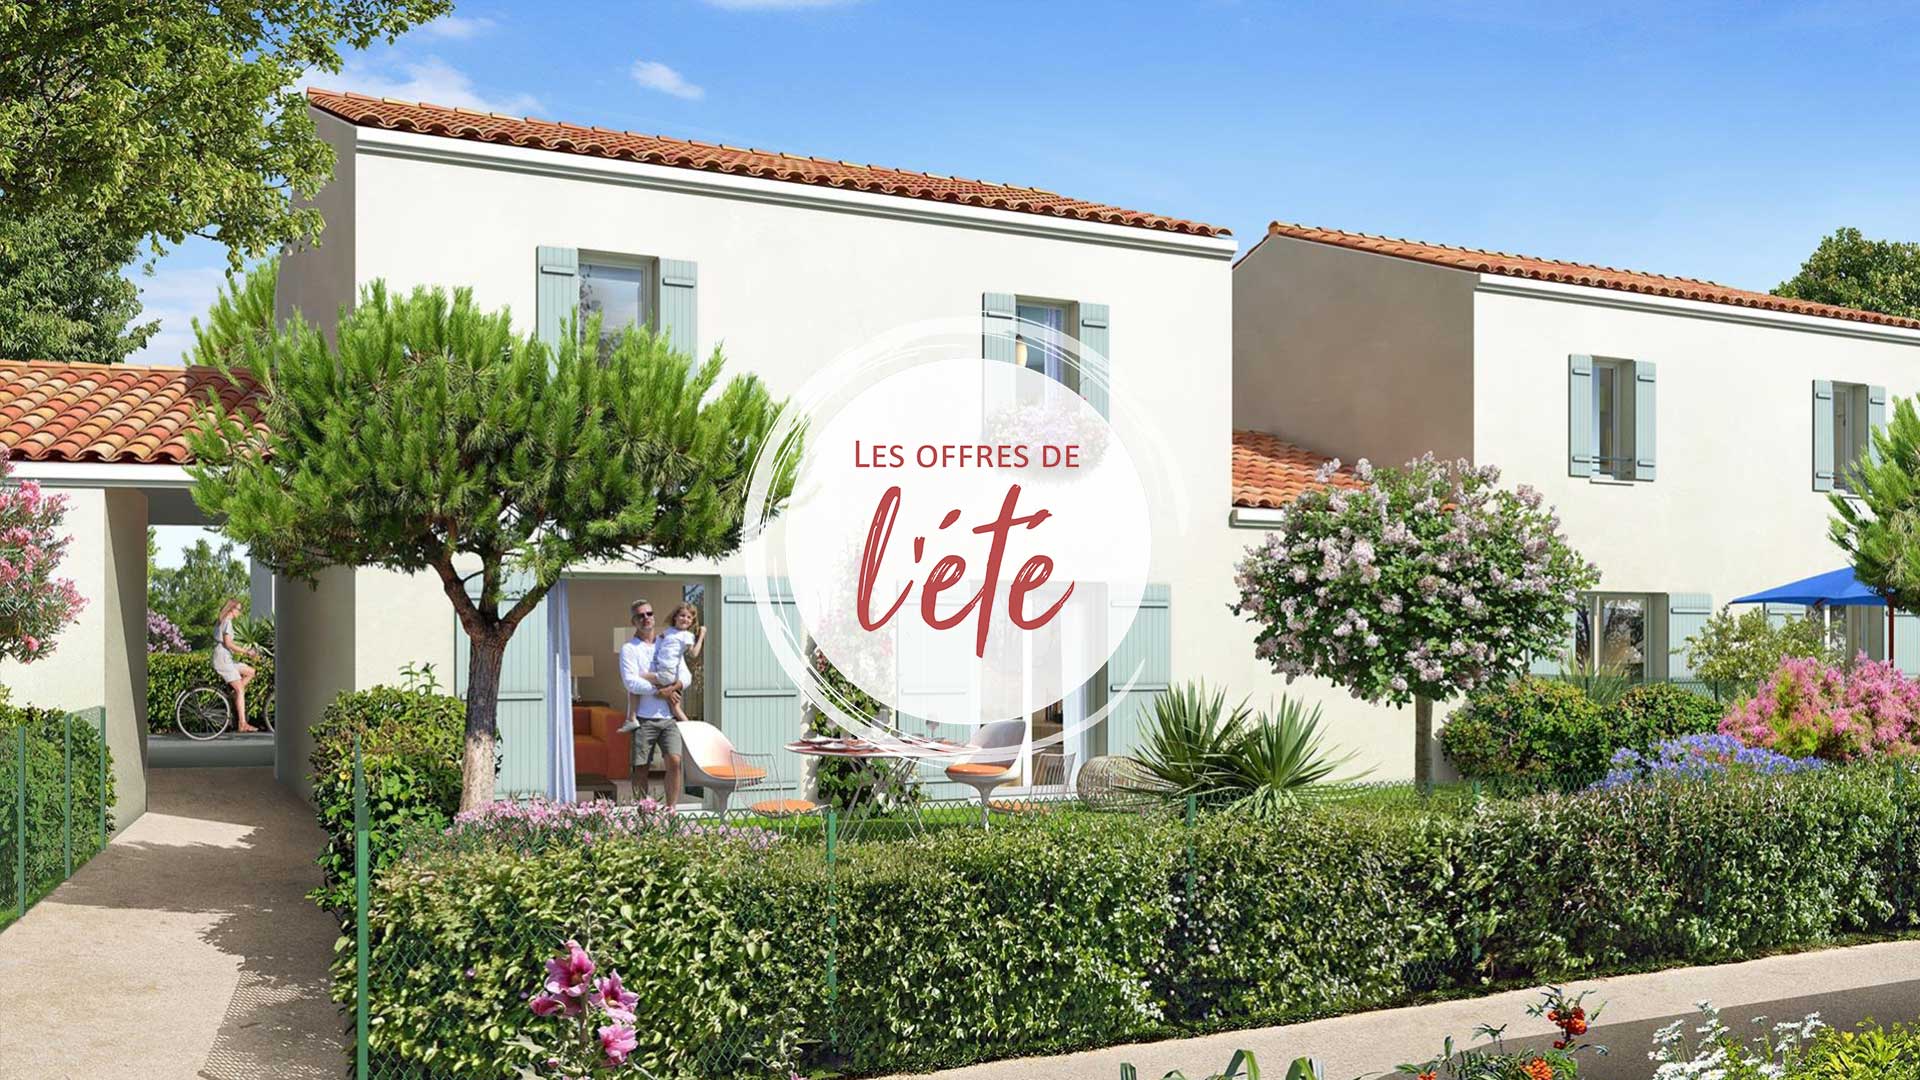 VISUELprogramme-immobilier-neuf-st-georges-d-oleron-offres.jpg